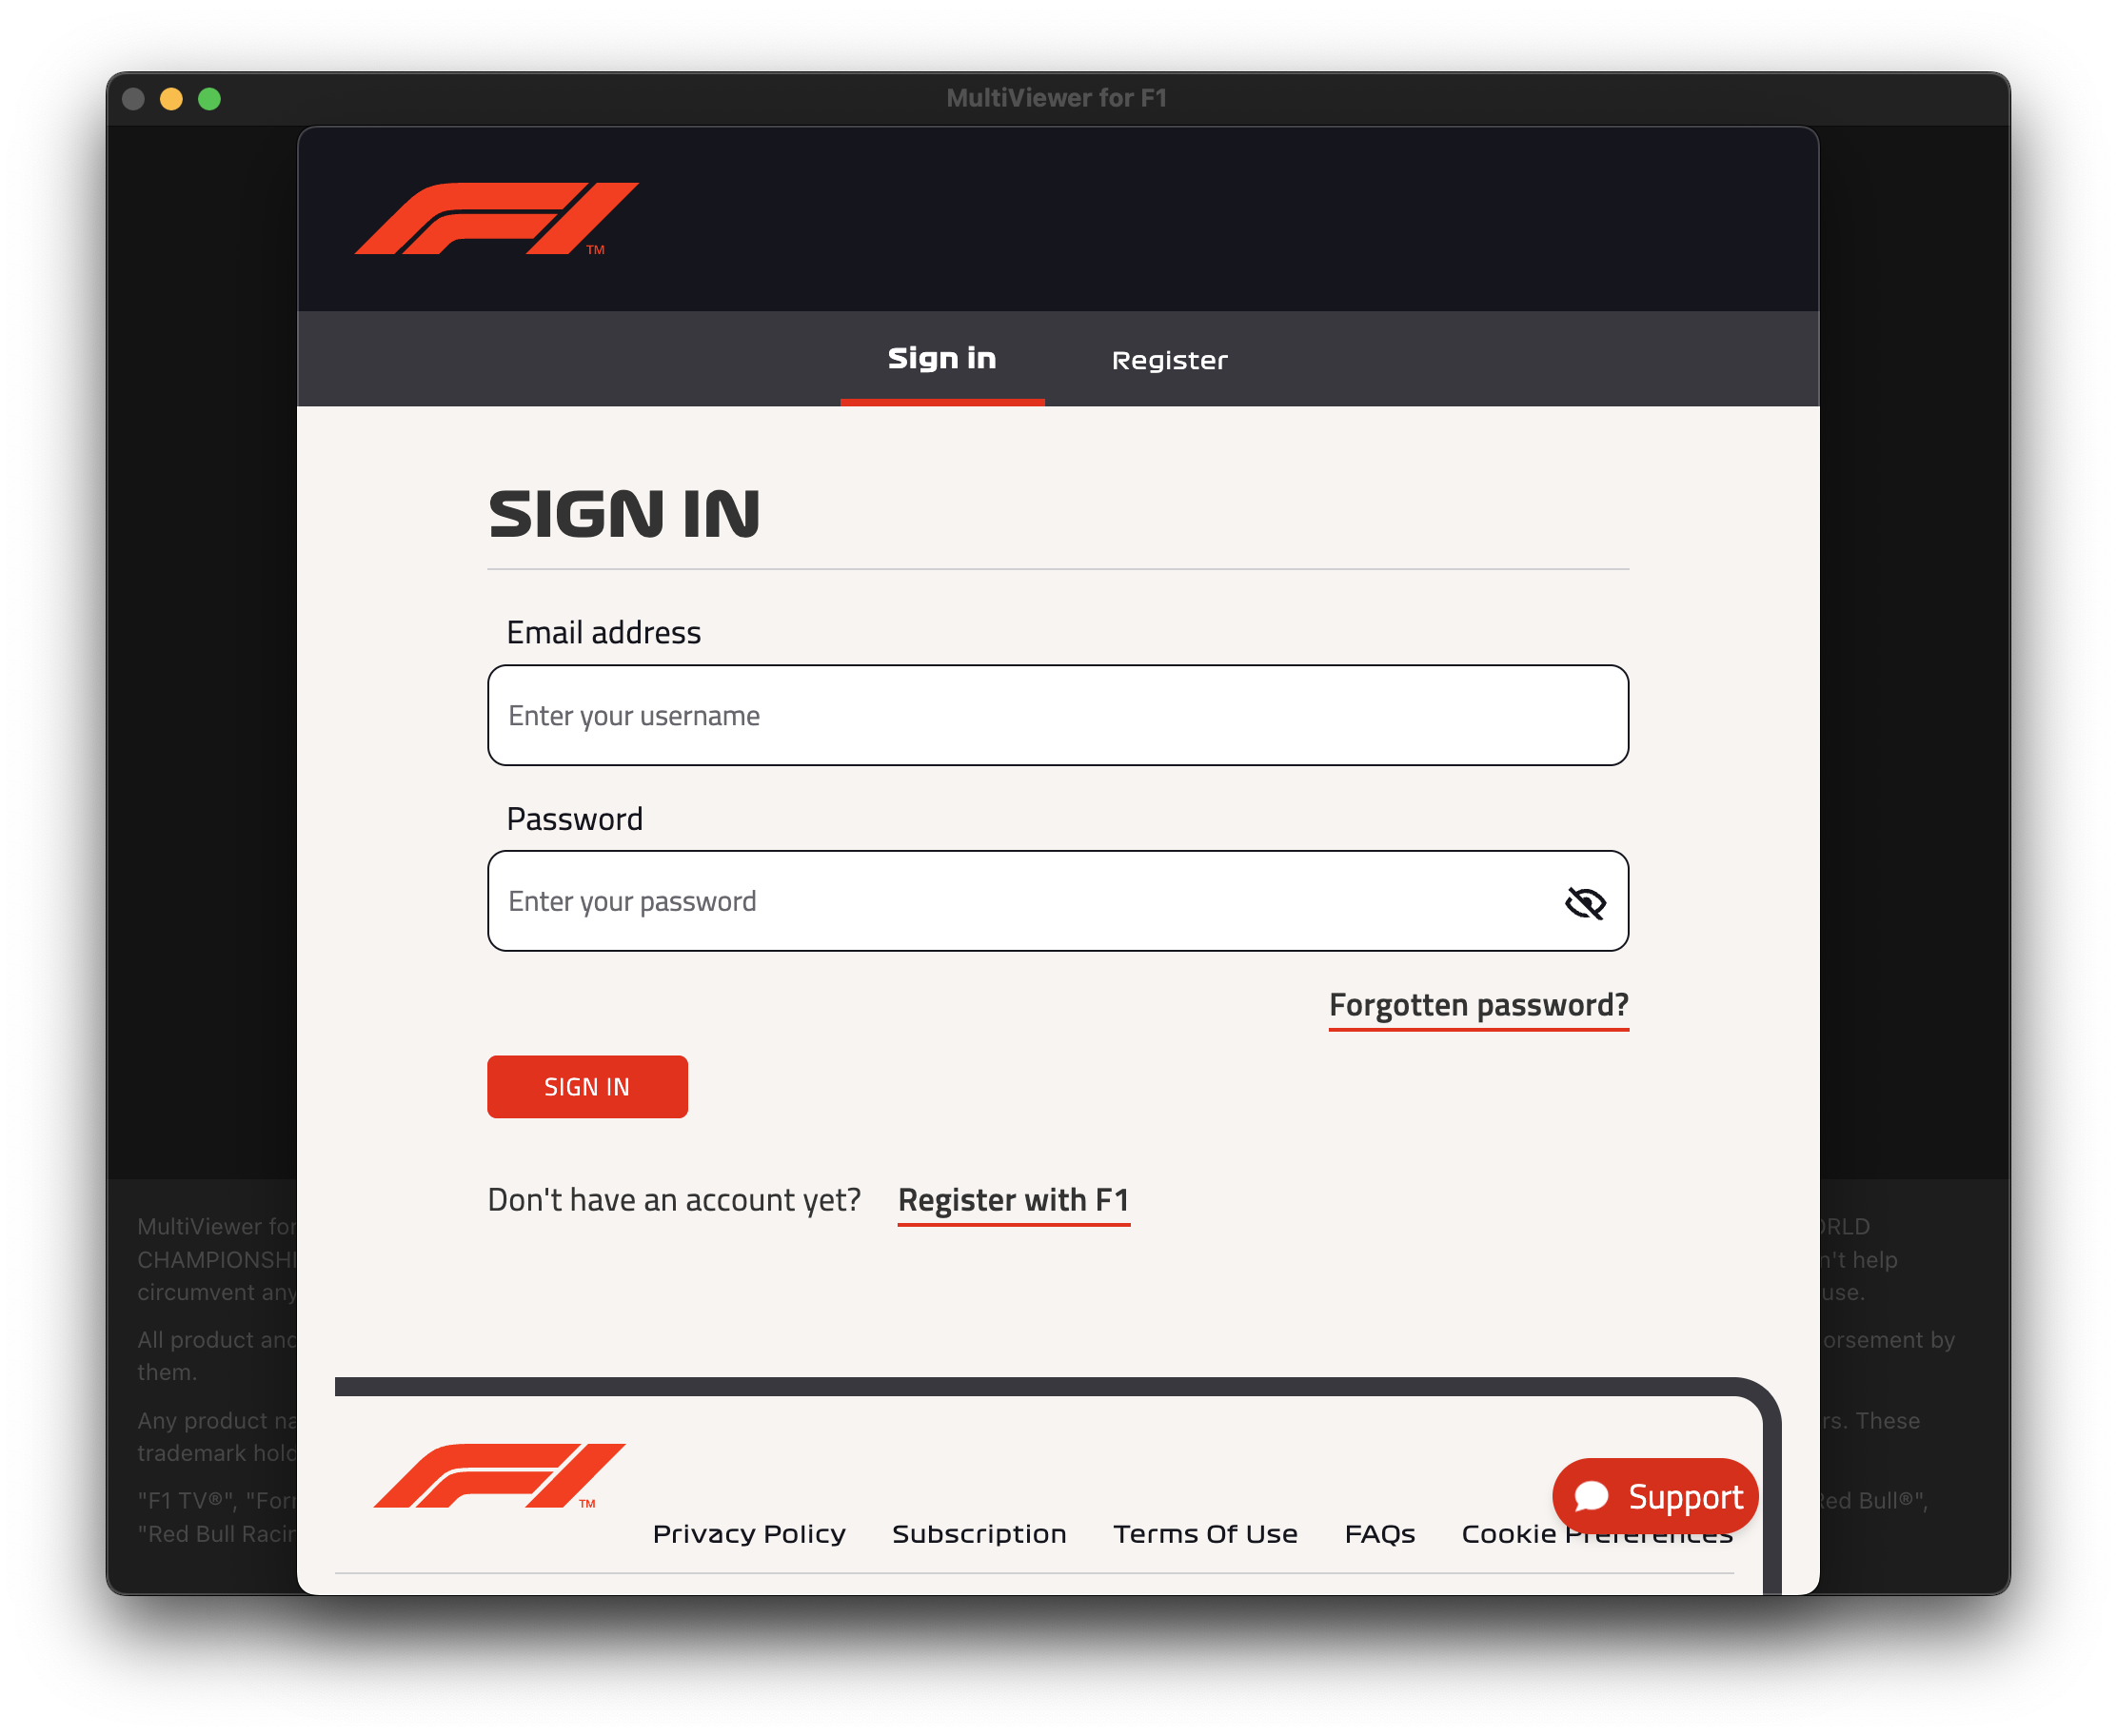 Authentication — MultiViewer for F1